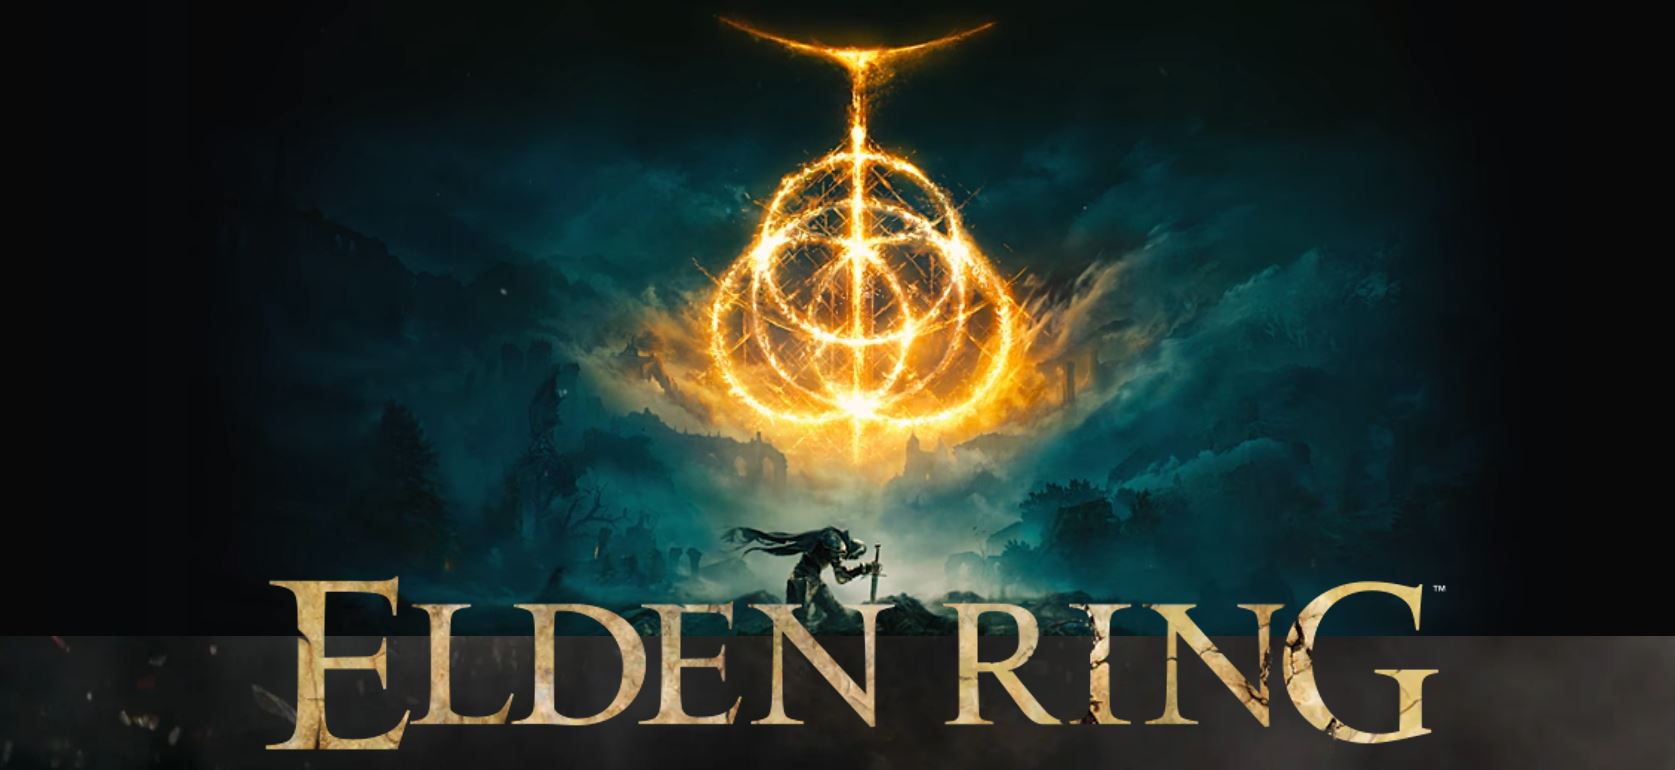 Elden Ring sells 16.6 million copies worldwide in less than 6 months